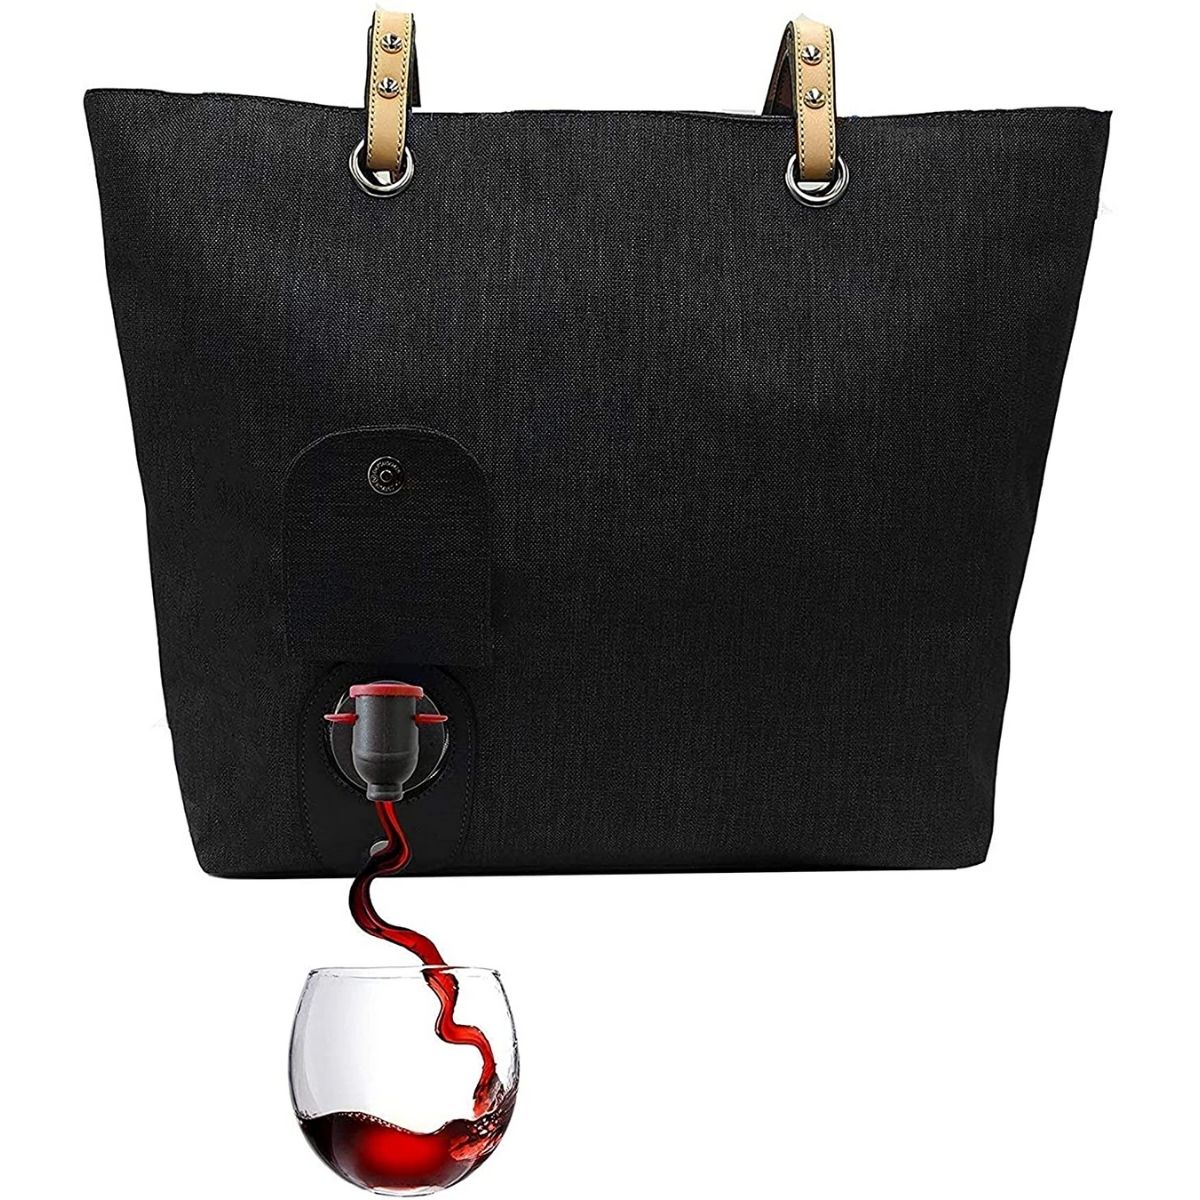 The Best Gifts for Wine Lovers Option: PortoVino City Wine Tote Black